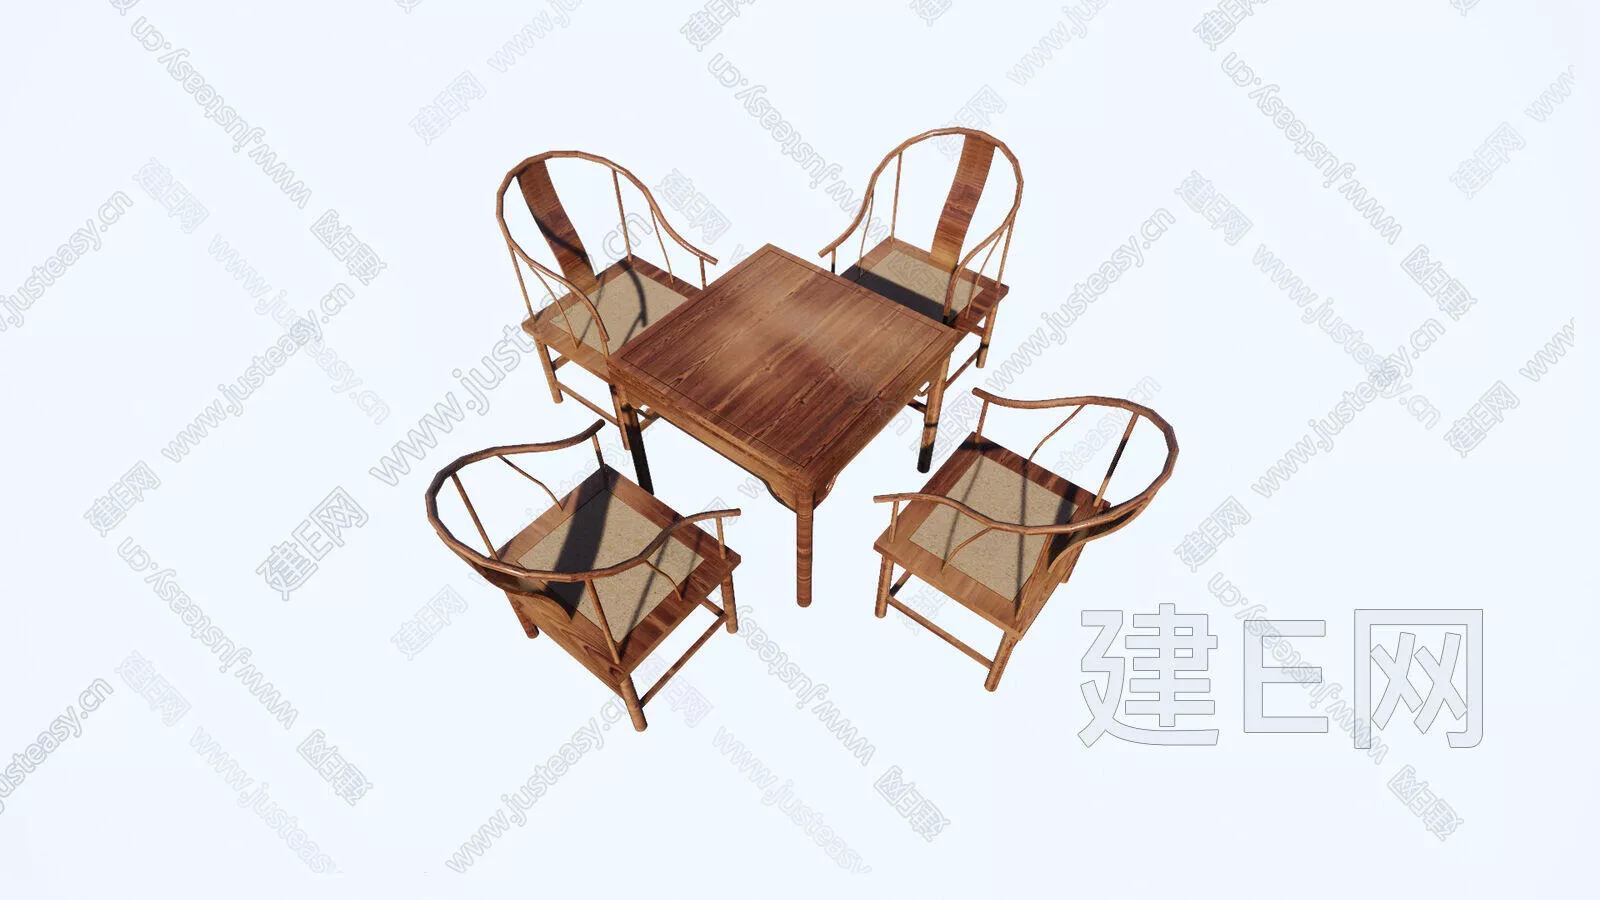 CHINESE DINING TABLE SET - SKETCHUP 3D MODEL - ENSCAPE - 111886802